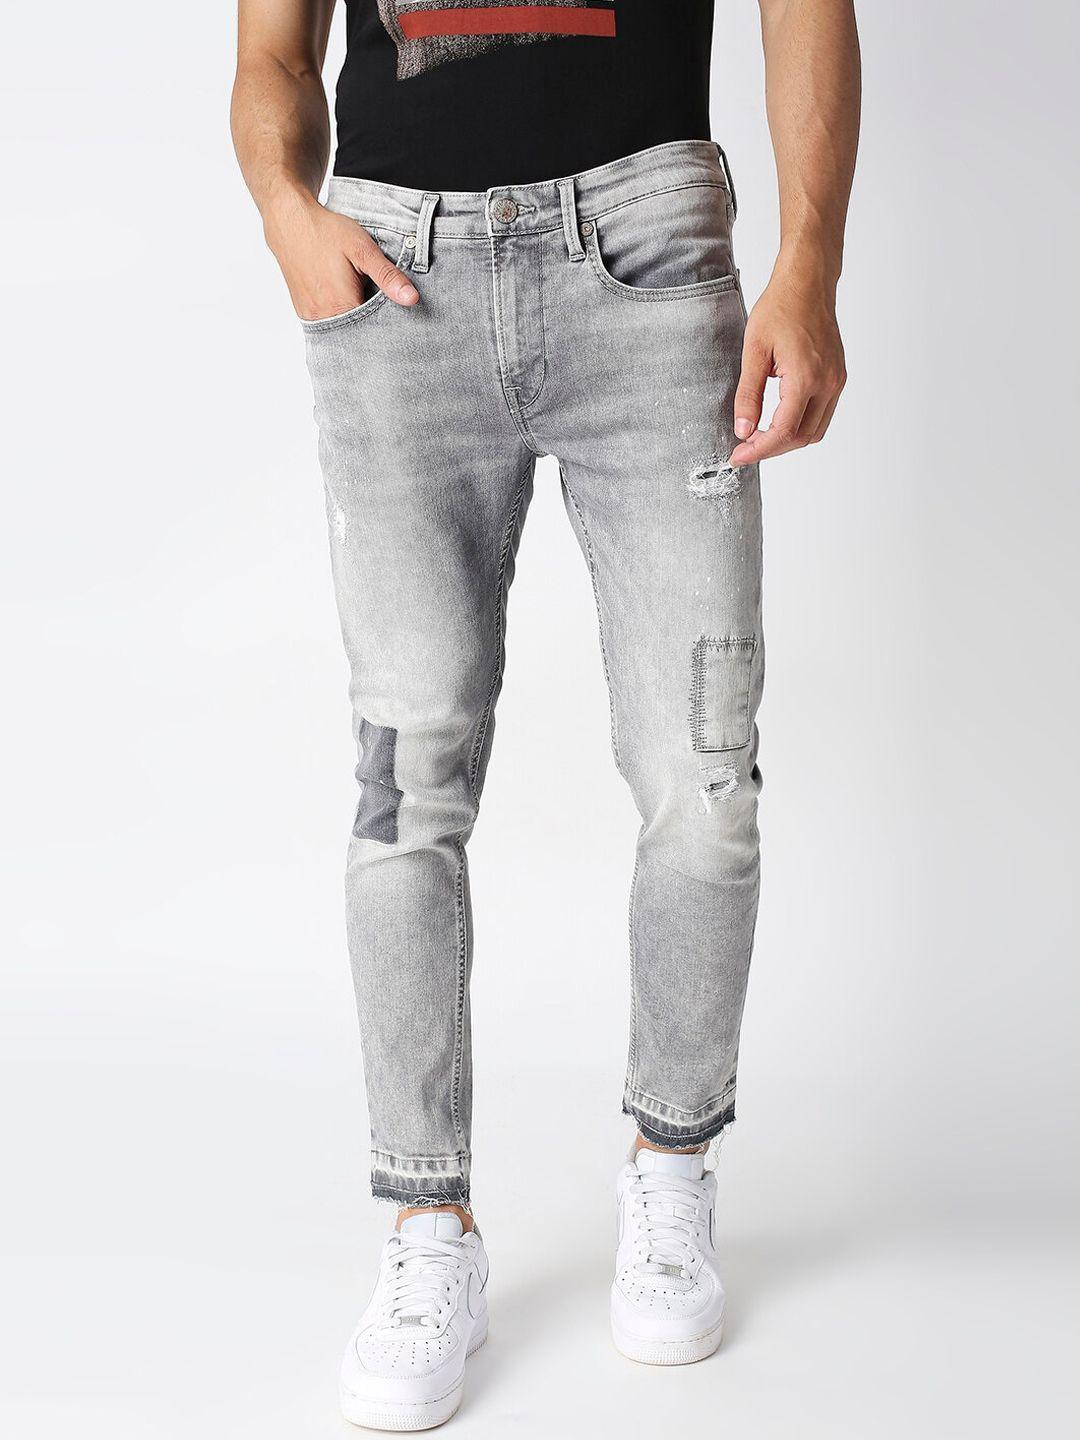 pepe-jeans-men-grey-skinny-fit-mildly-distressed-heavy-fade-stretchable-jeans